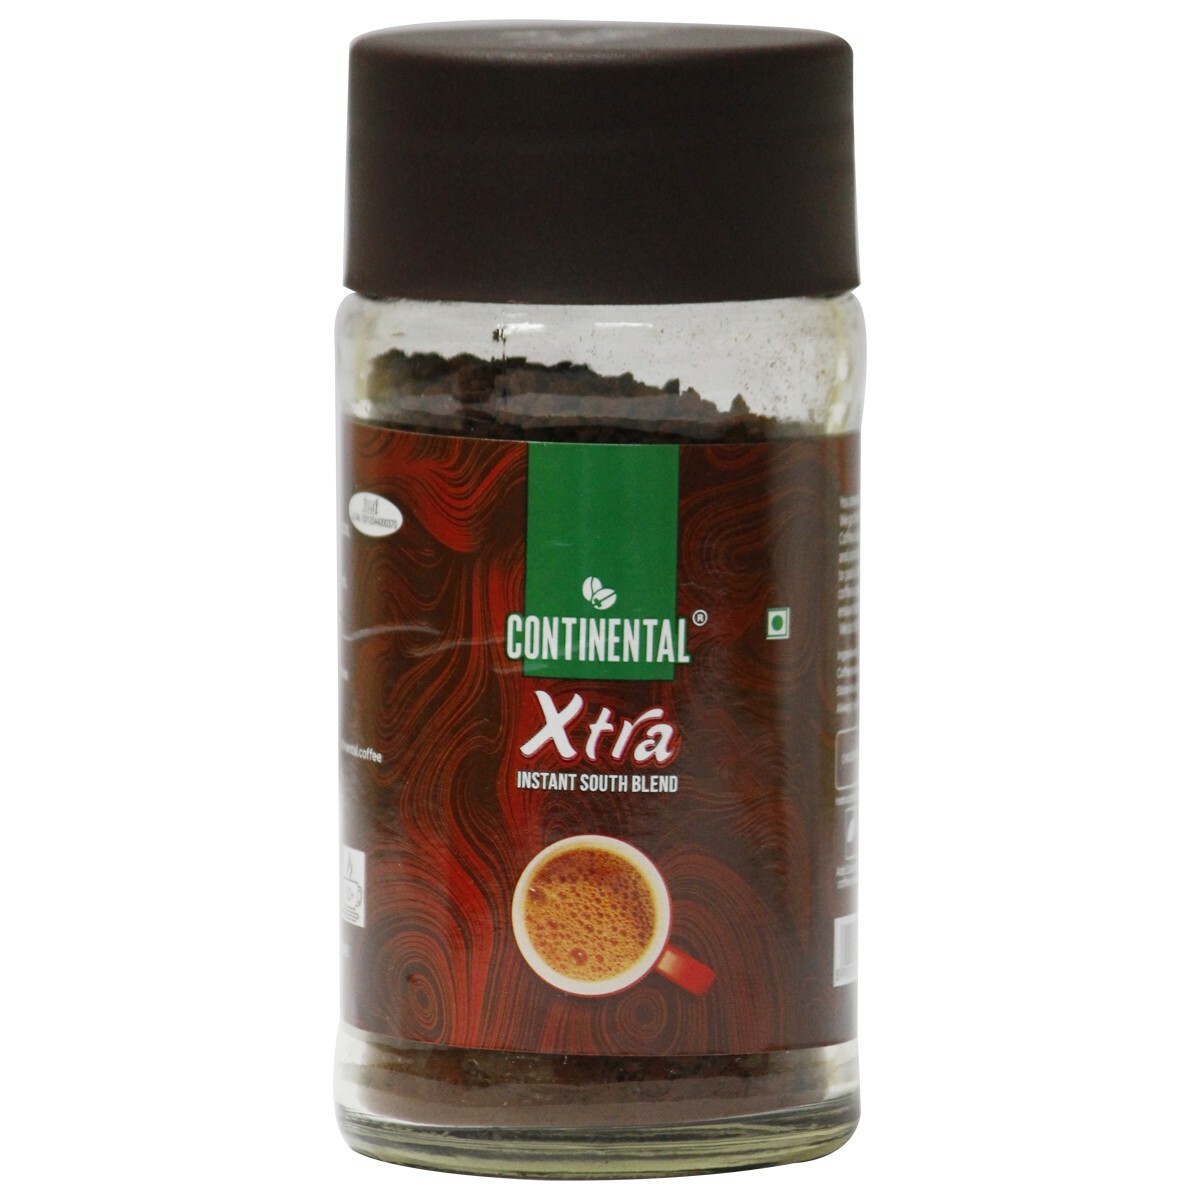 CONTINENTAL Xtra Instant South Blend Coffee 50g